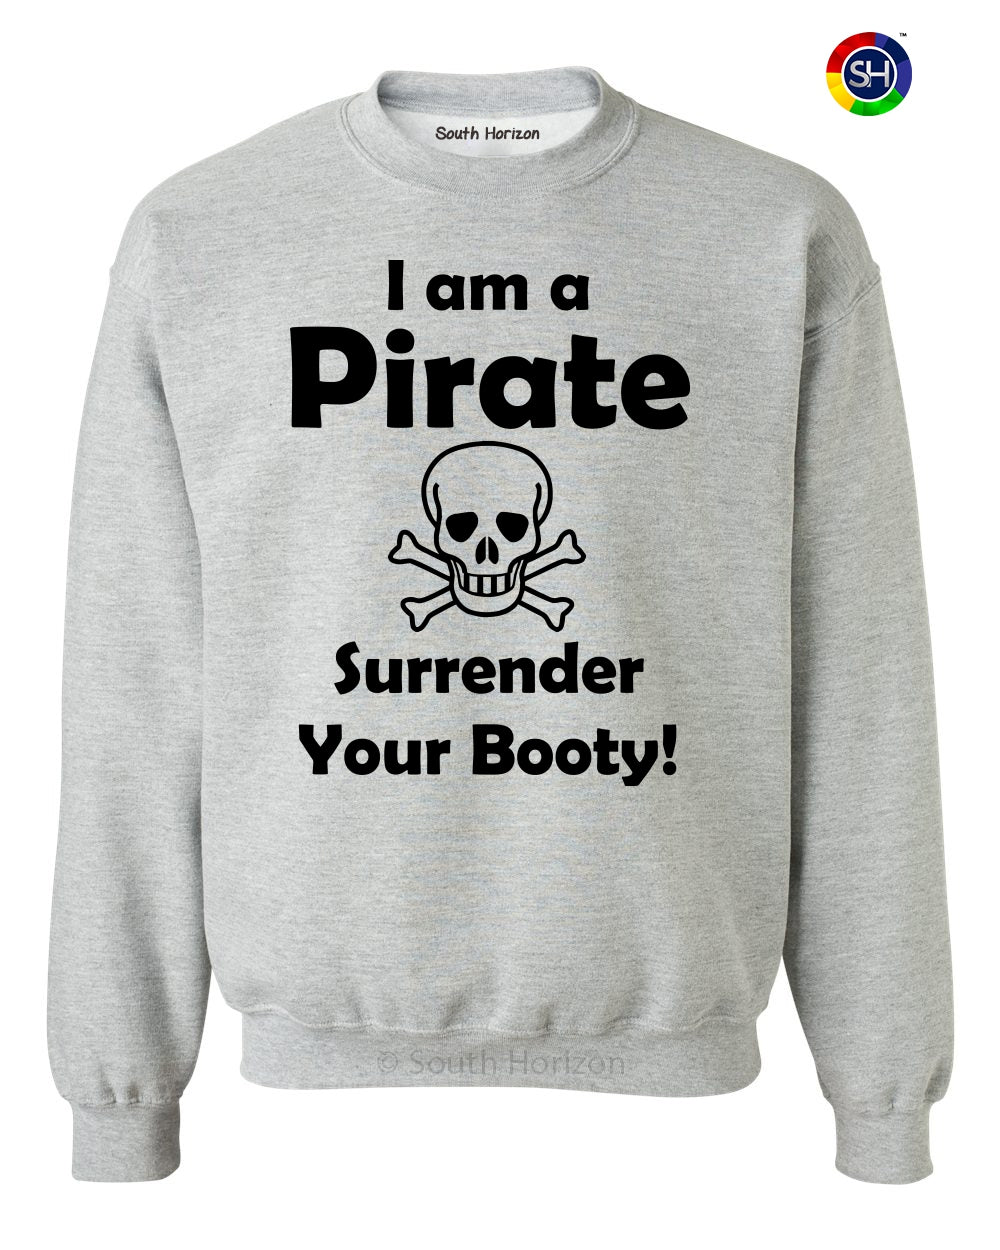 I am a Pirate, Surrender Your Booty on SweatShirt